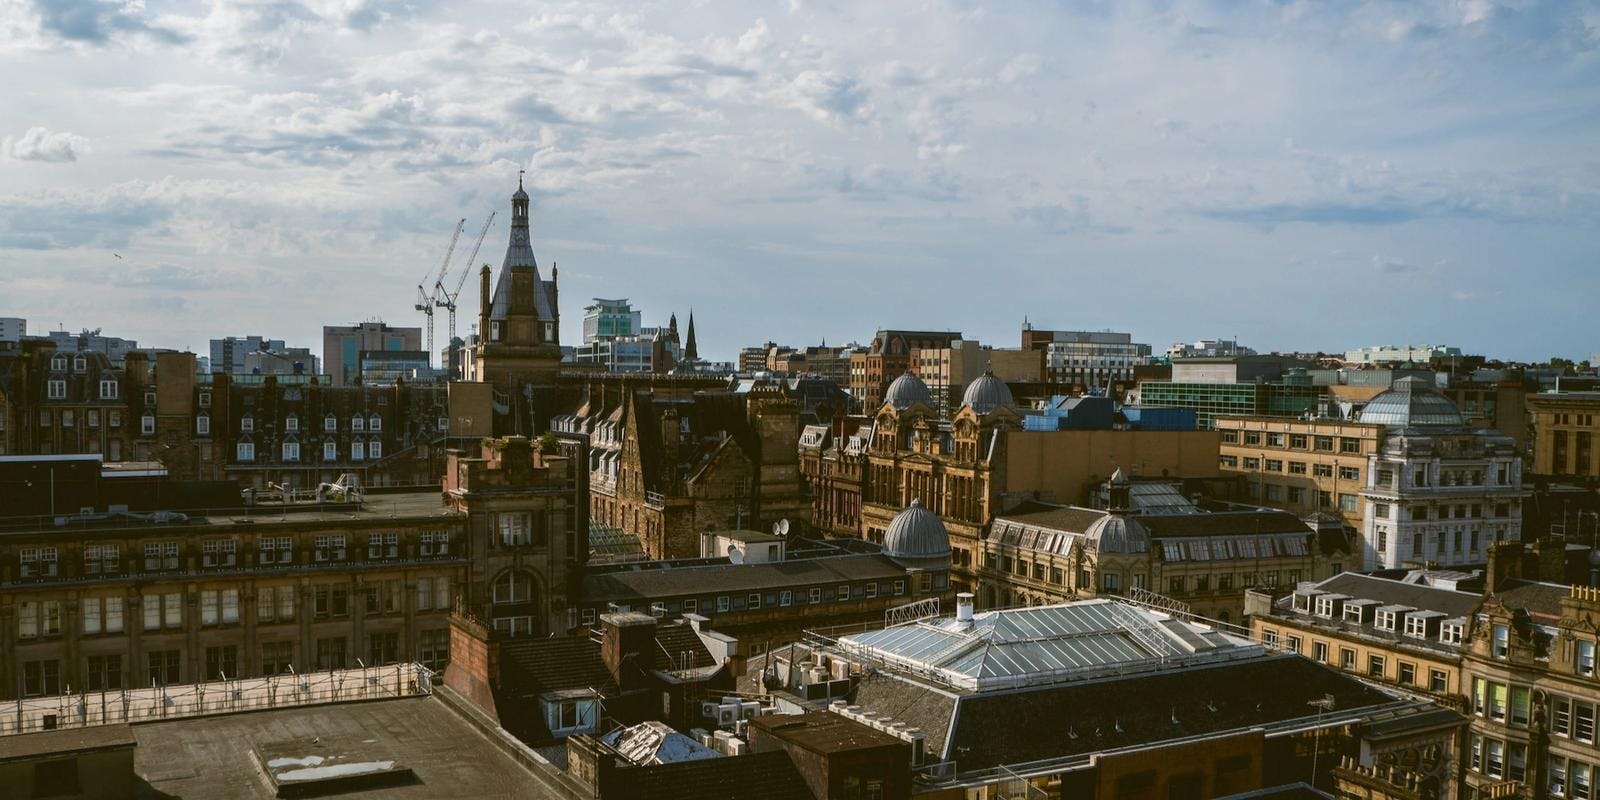 Rooftops in Glasgow under a partly cloudy sky